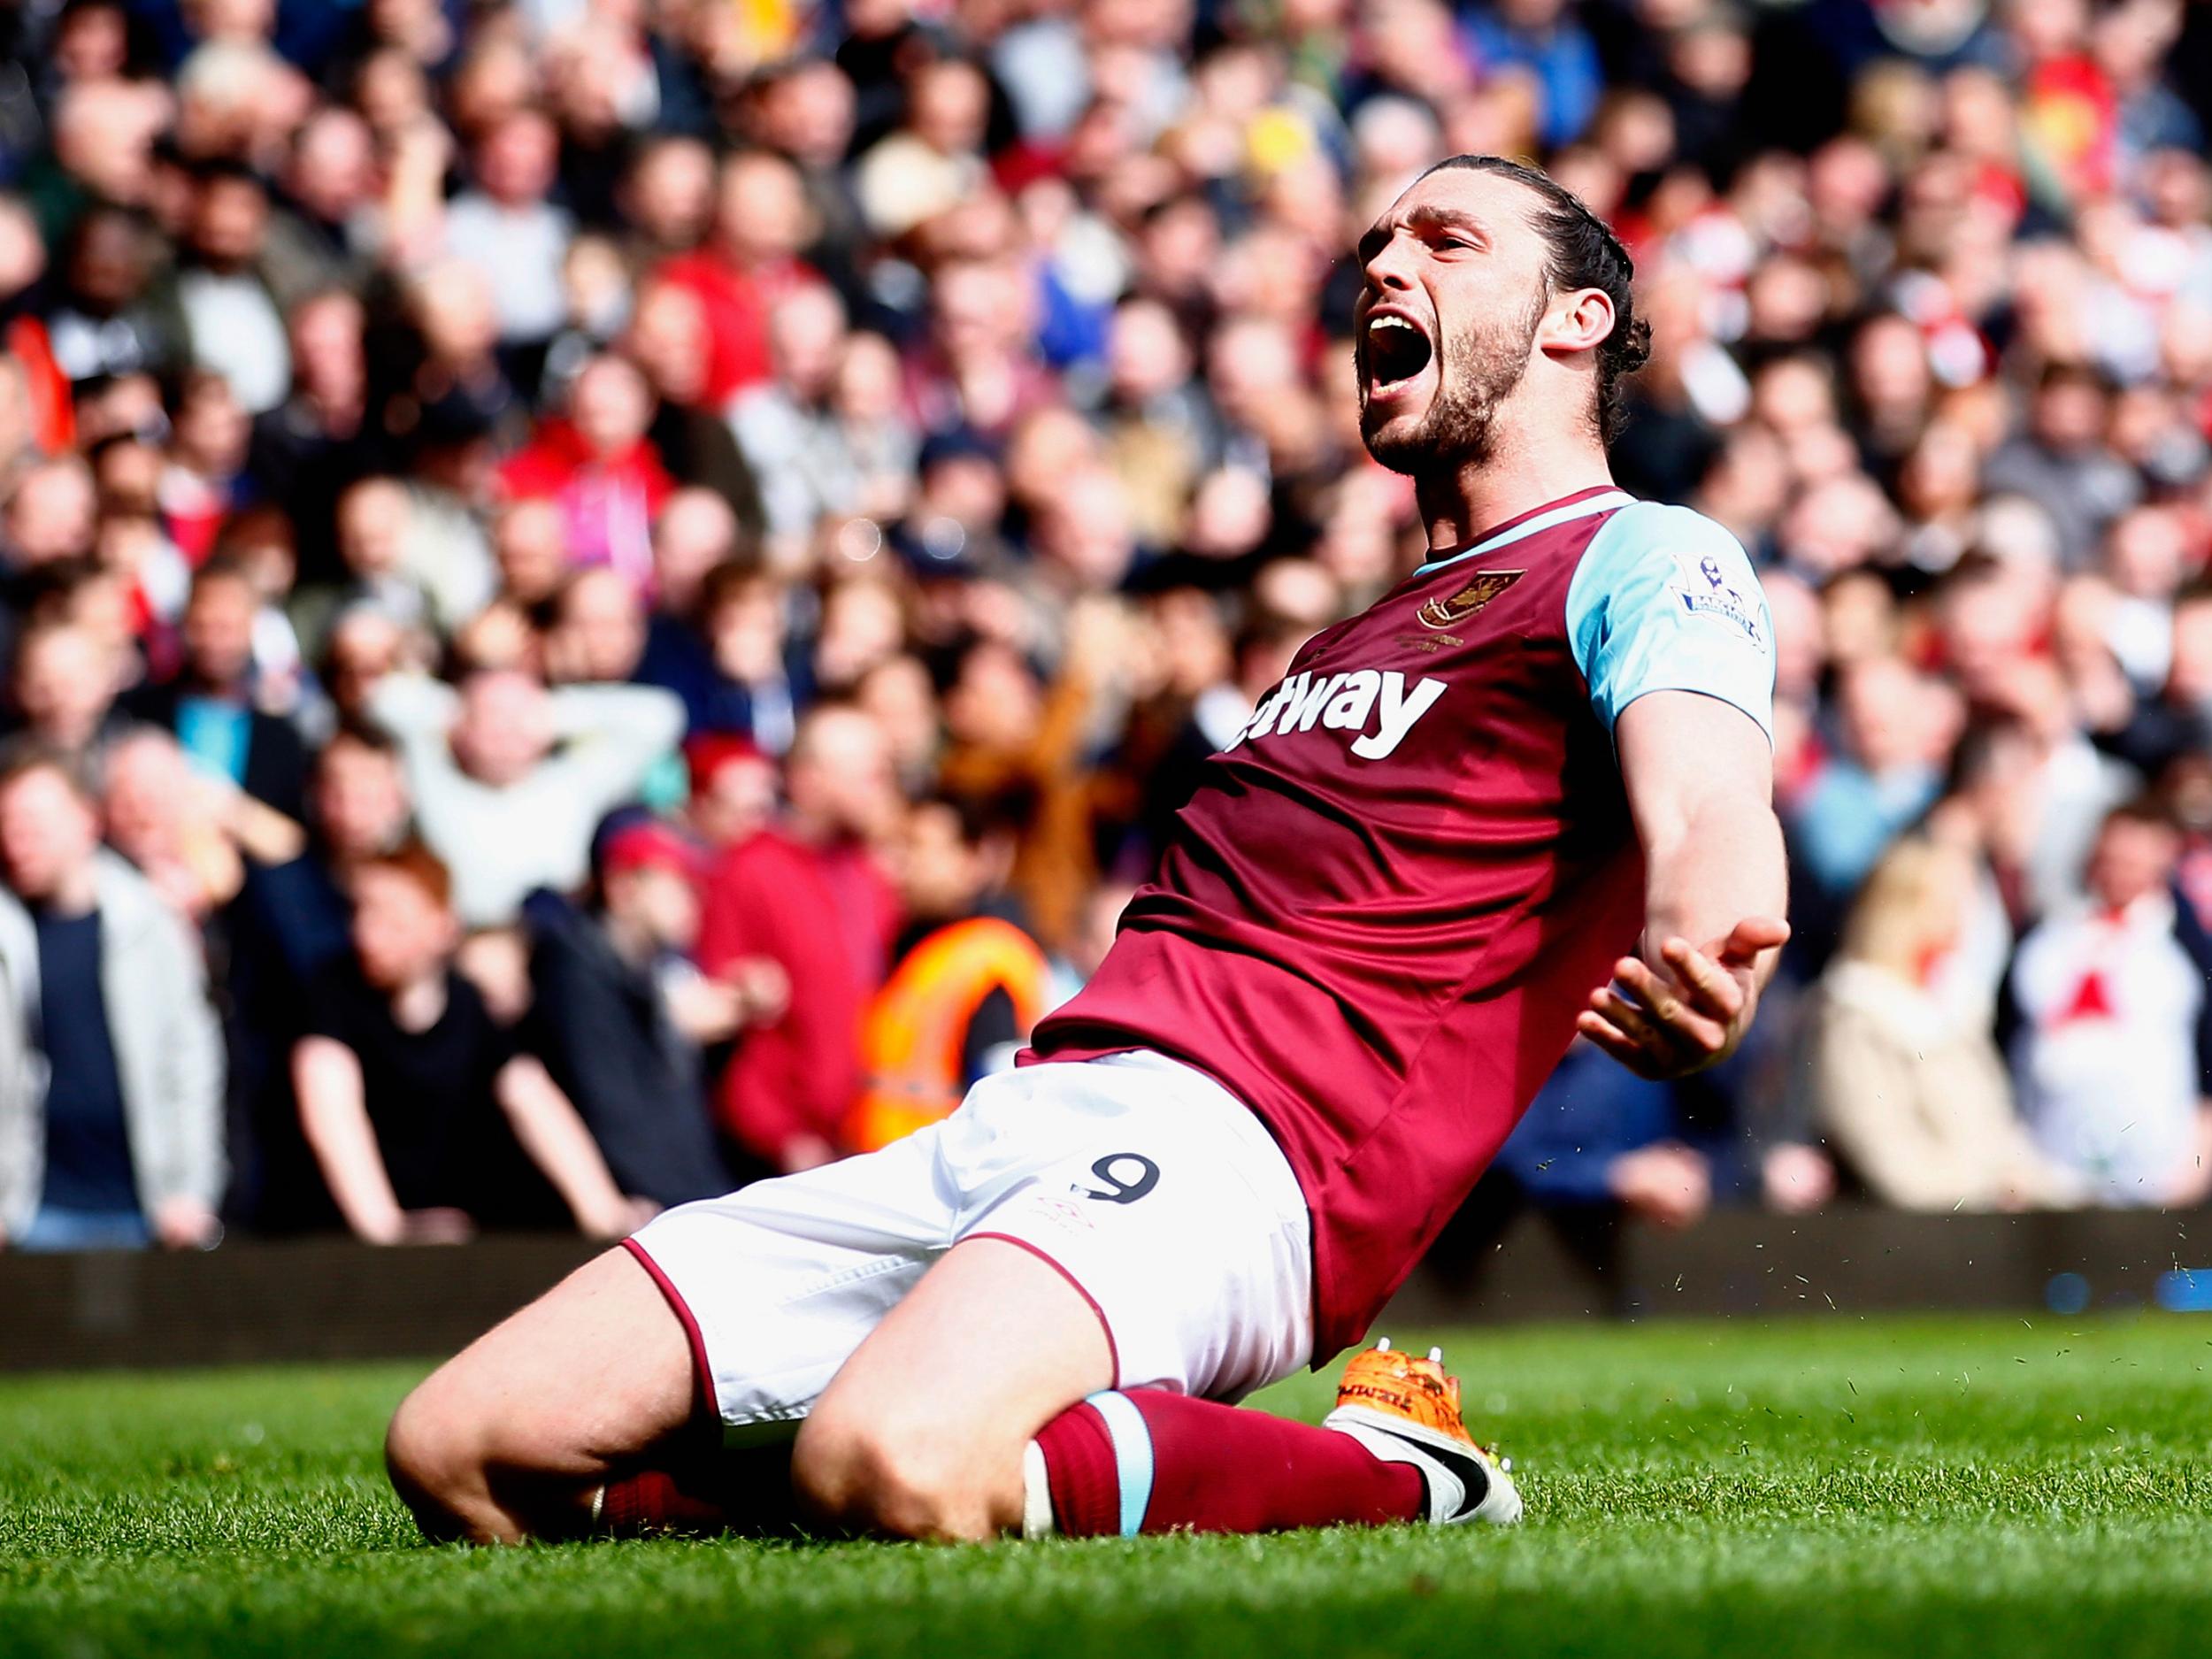 Is there a future ahead for Carroll in the Premier League? (Getty)